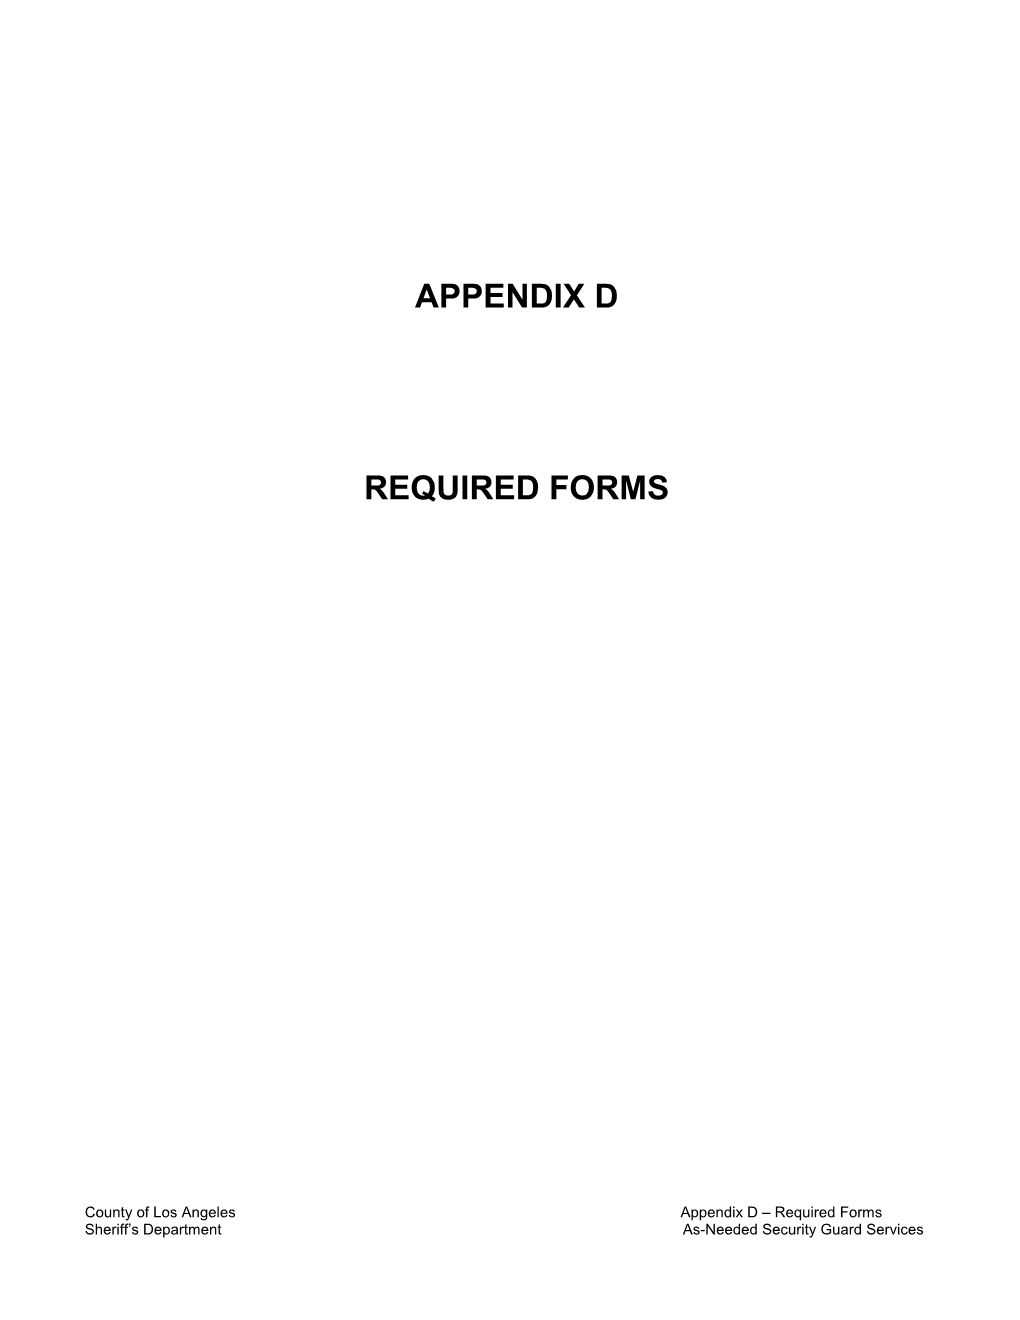 County of Los Angeles Appendix D Required Forms